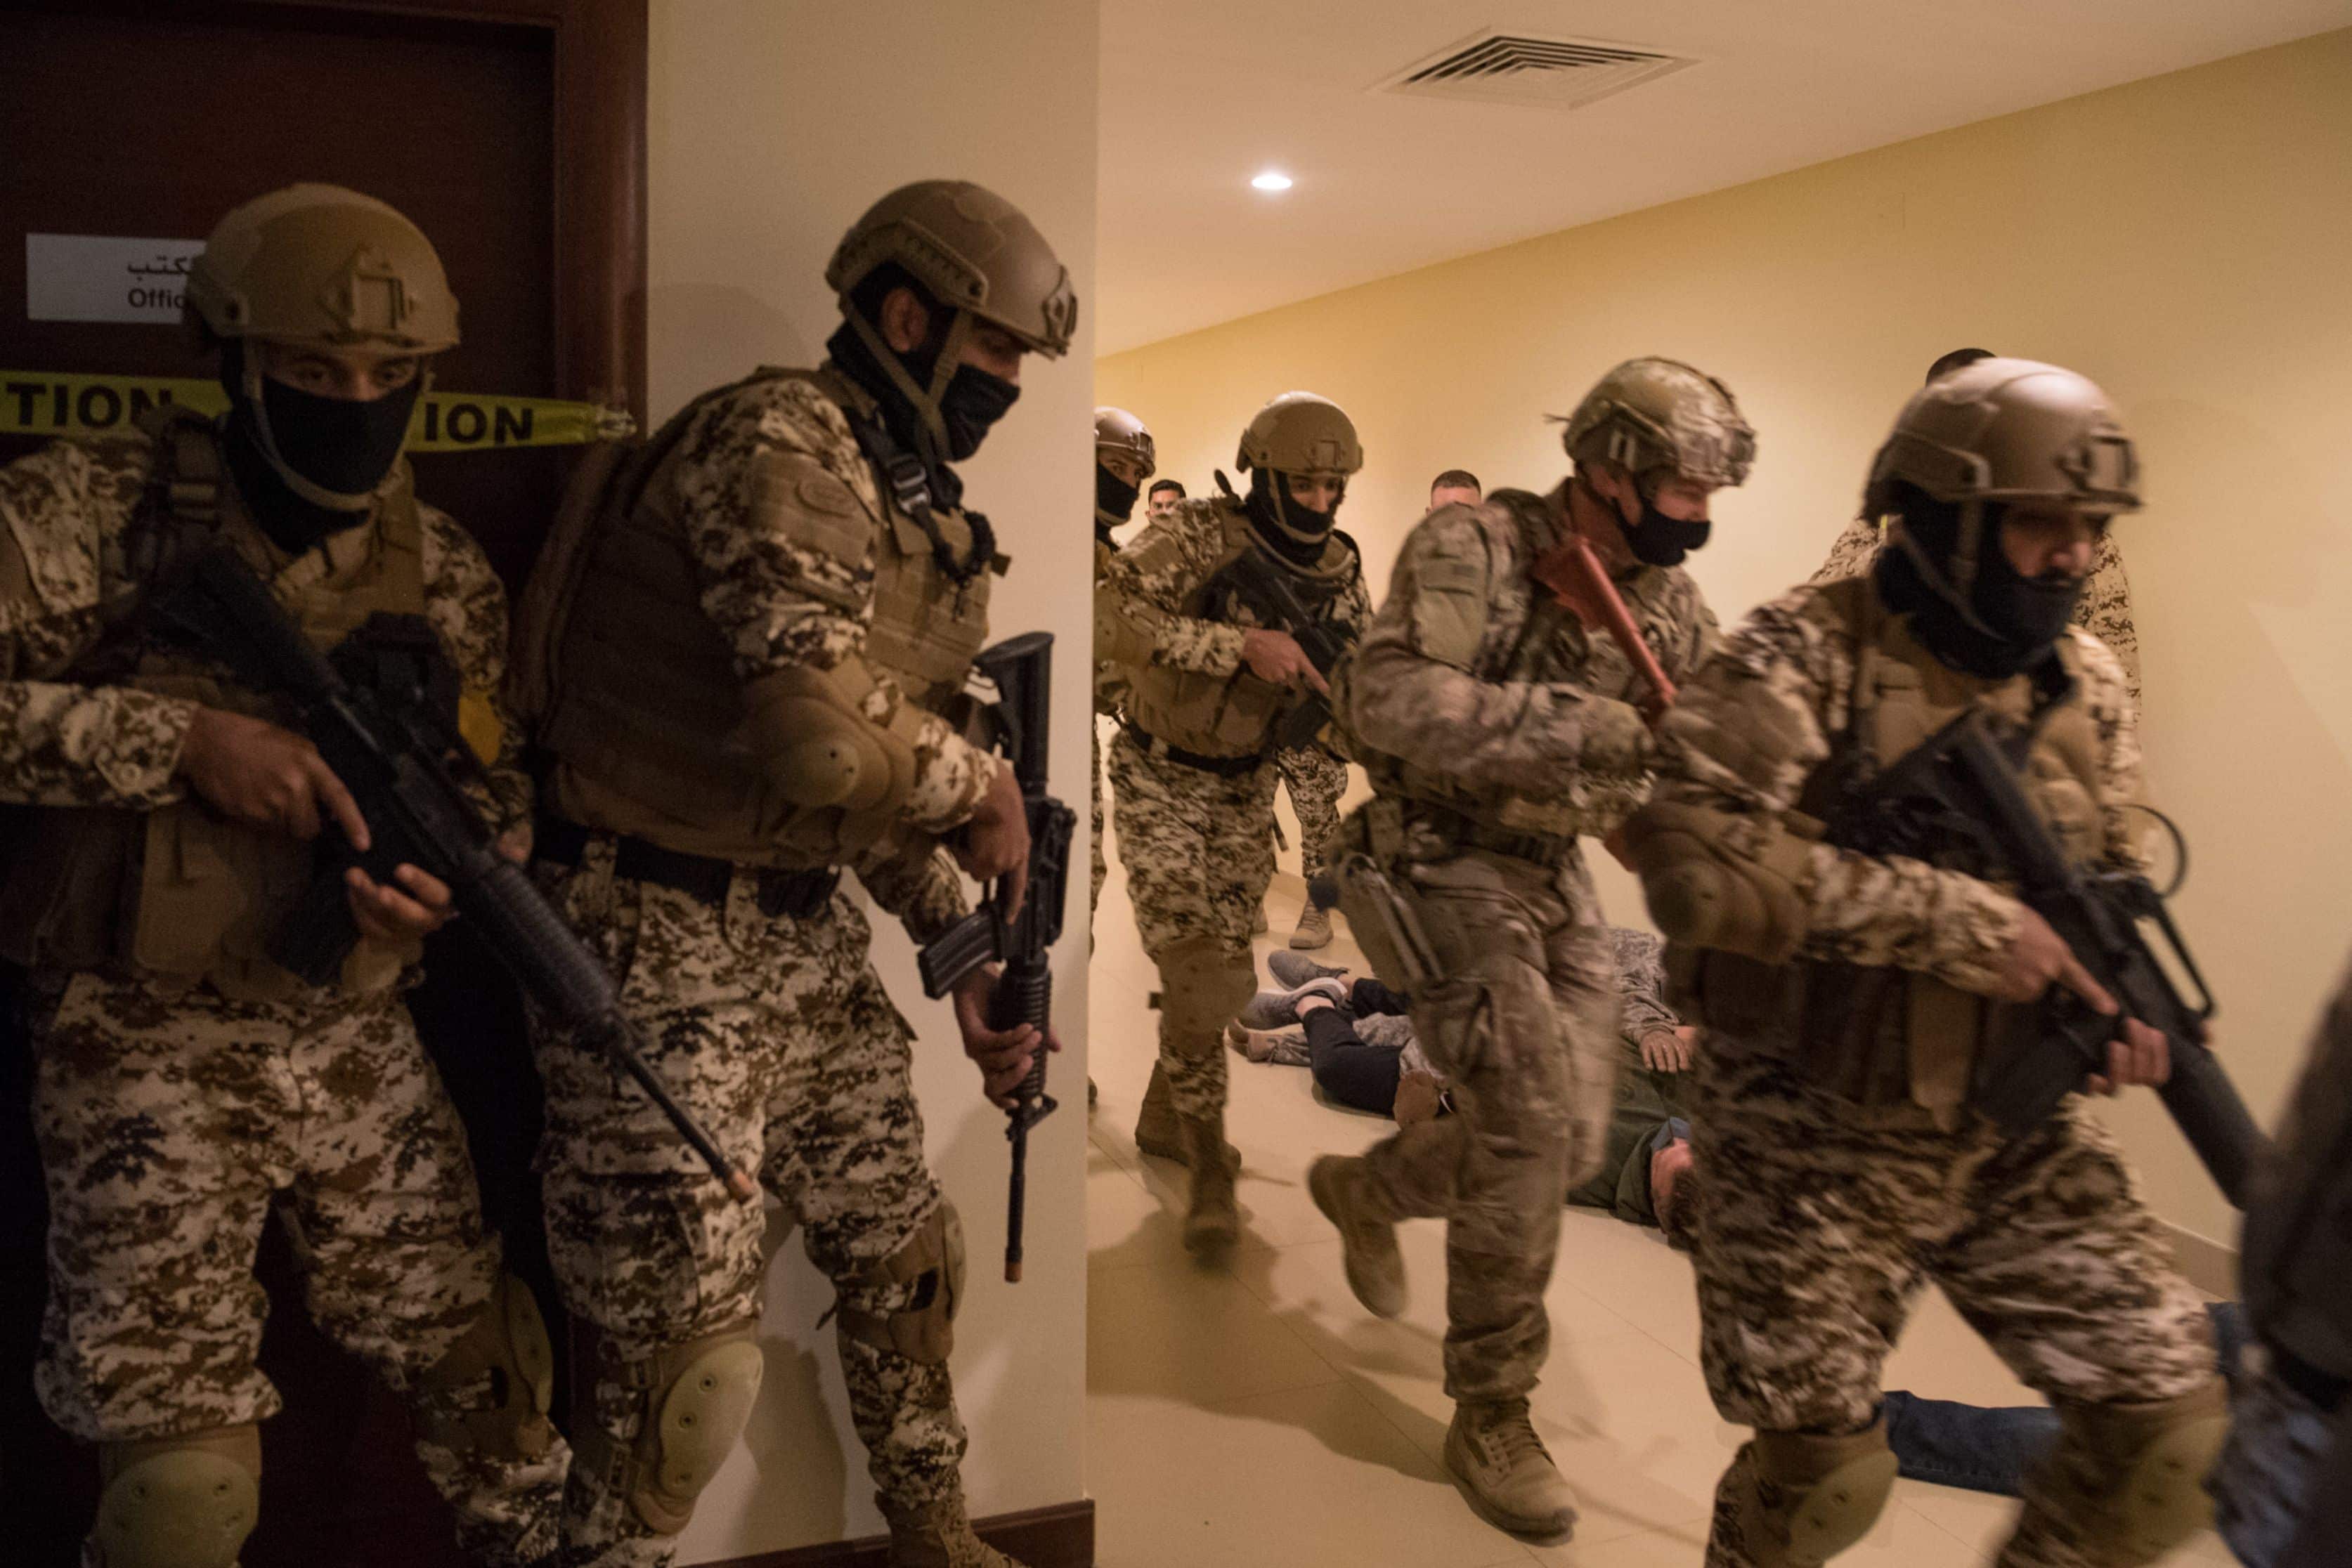 210113-N-YD651-1054 5TH FLEET AREA OF OPERATIONS (Jan. 13, 2021) Bahrain Defense Force and U.S. Naval Forces Central Command personnel simulate clearing a building during a joint anti-terrorism exercise in the U.S. 5th Fleet Area of Operations, Jan. 13. The bilateral exercise focused on enhancing mutual security and anti-terrorism capabilities by testing responses to simulated scenarios. (U.S. Navy photo by Mass Communication Specialist 2nd Class Matthew Riggs)